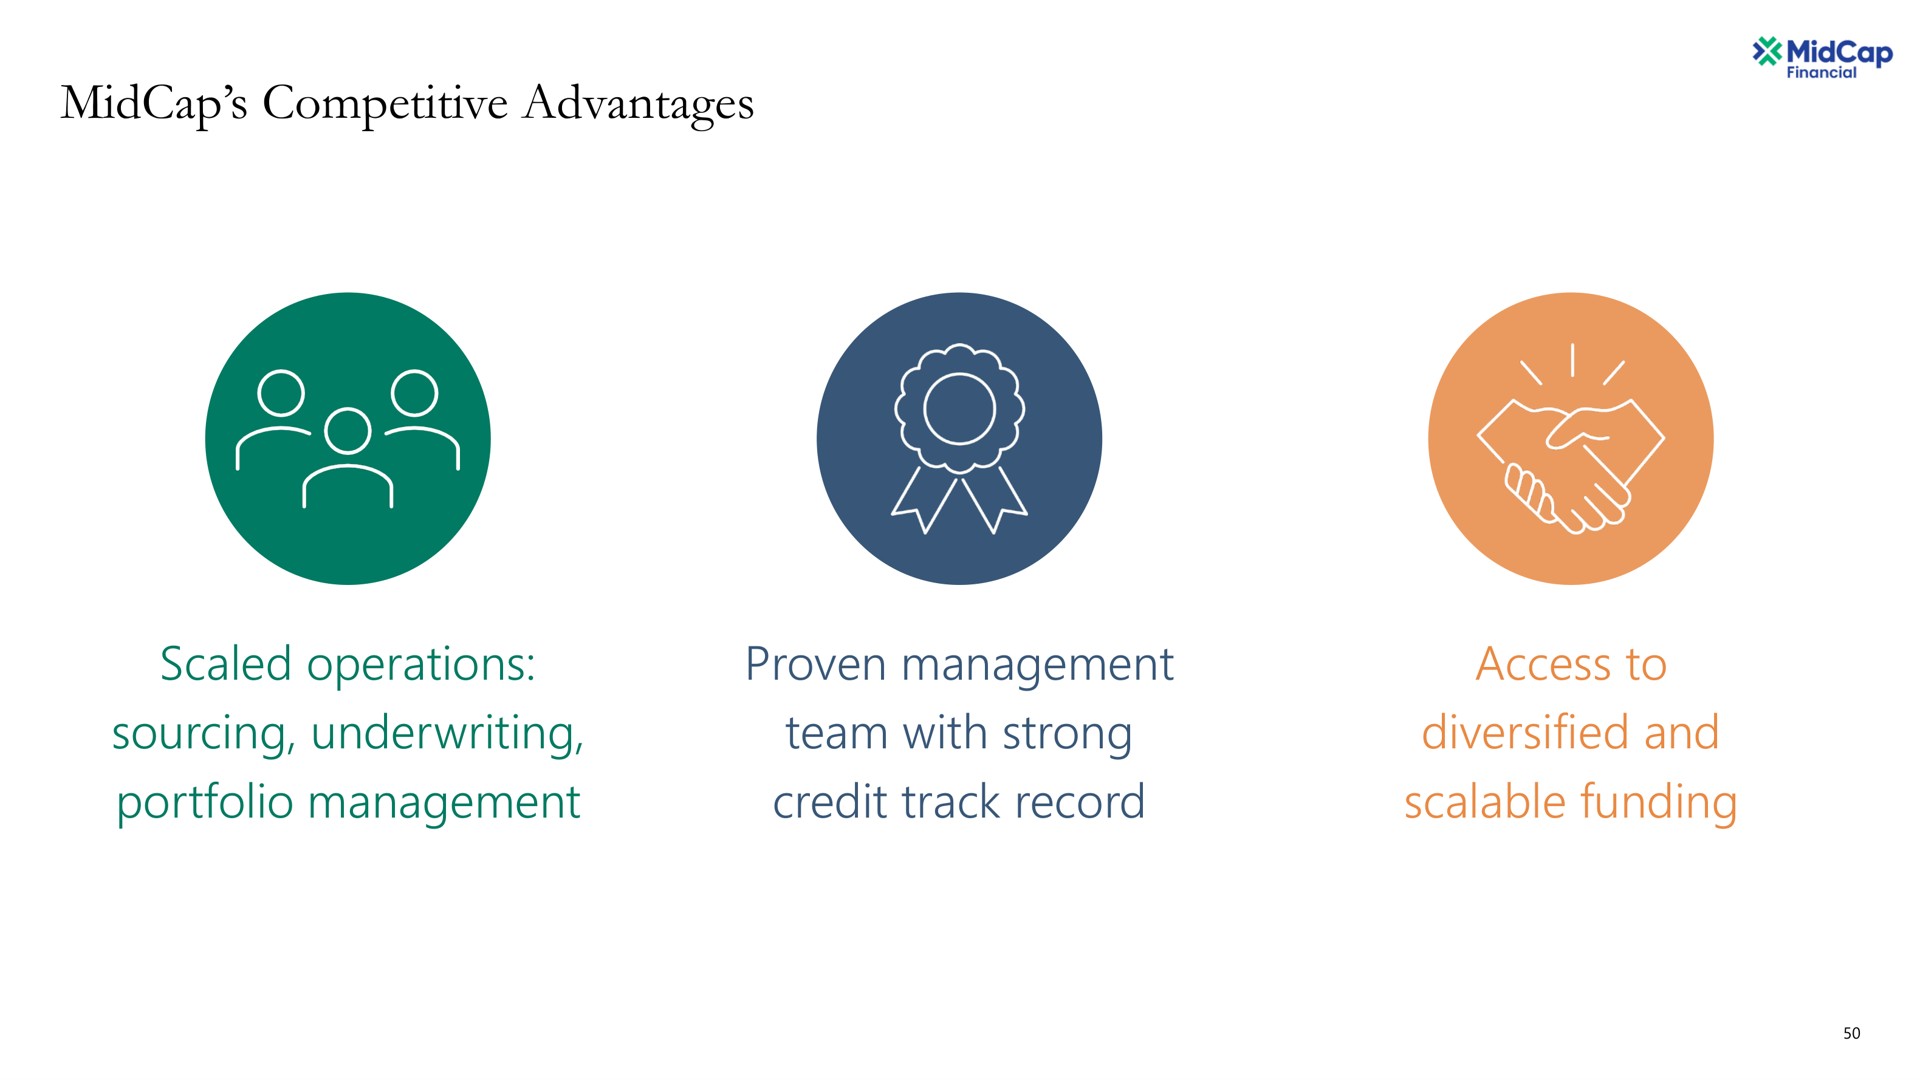 competitive advantages scaled operations sourcing underwriting portfolio management proven management team with strong credit track record access to diversified and scalable funding | Apollo Global Management